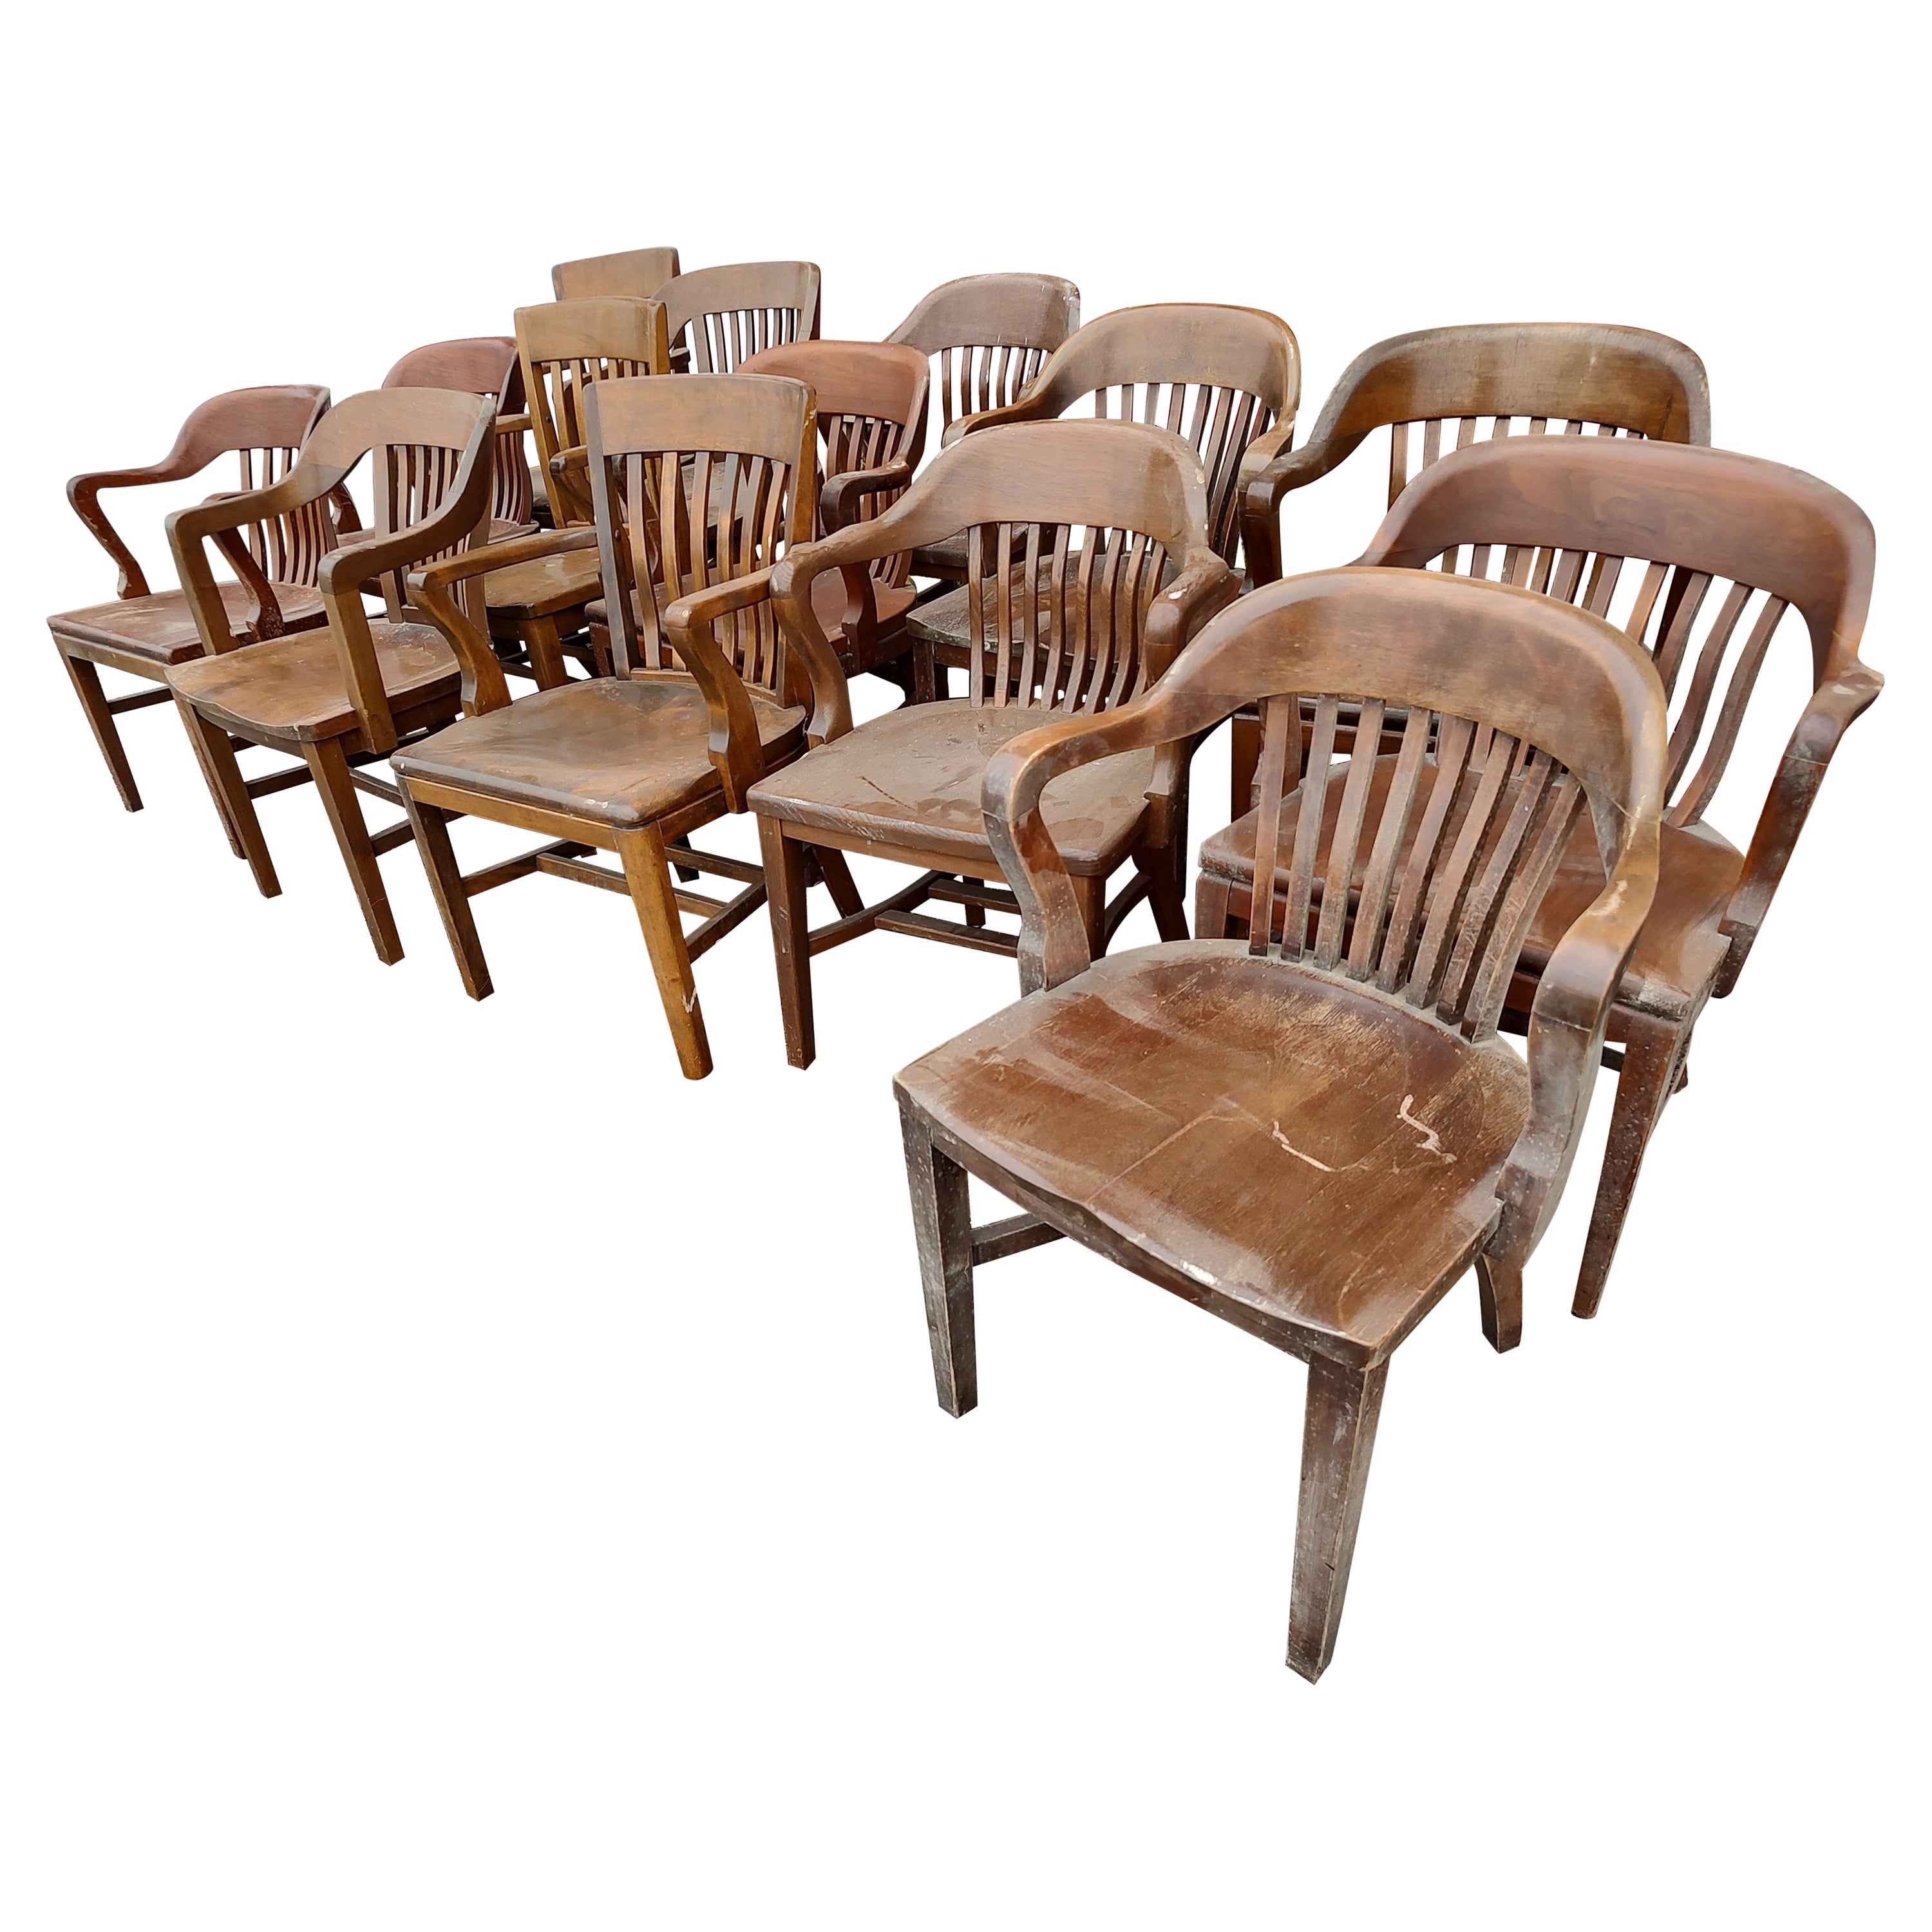 American C1940 Bankers Dining Room Armchairs 3 Square Back  1 Round back Available  For Sale